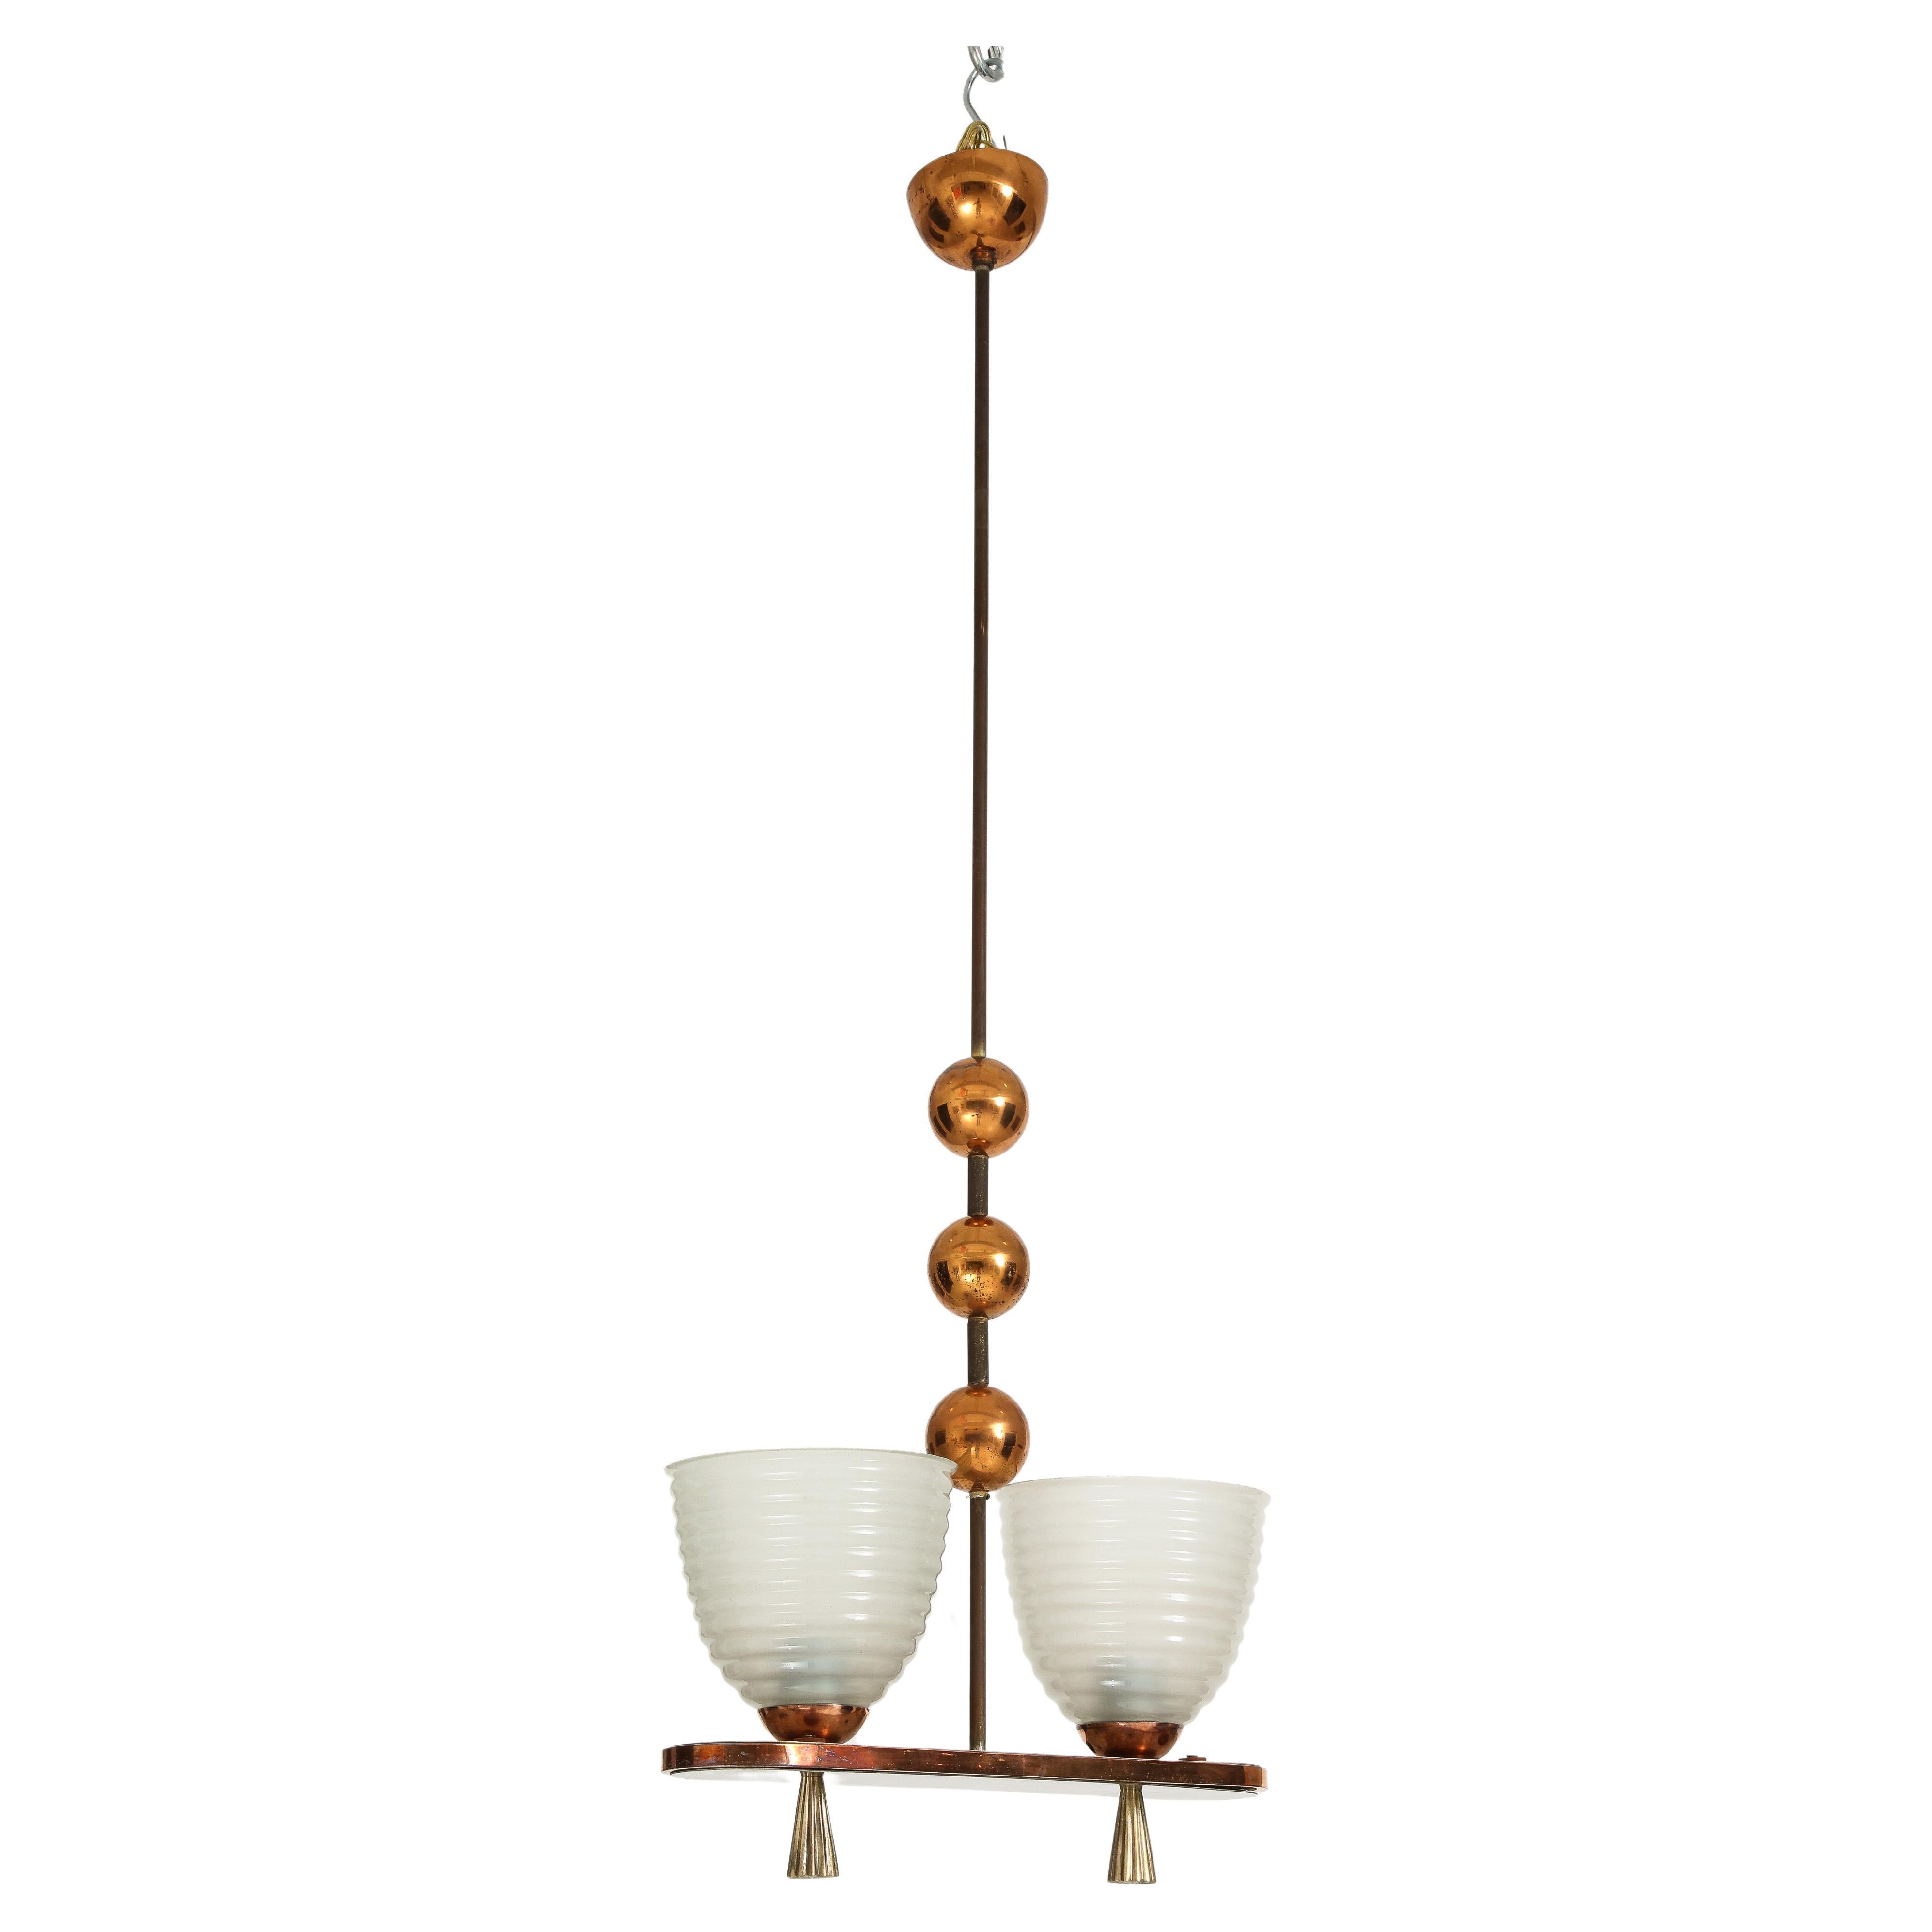 1940's Italian Copper And Brass Chandelier With Glass Shades For Sale